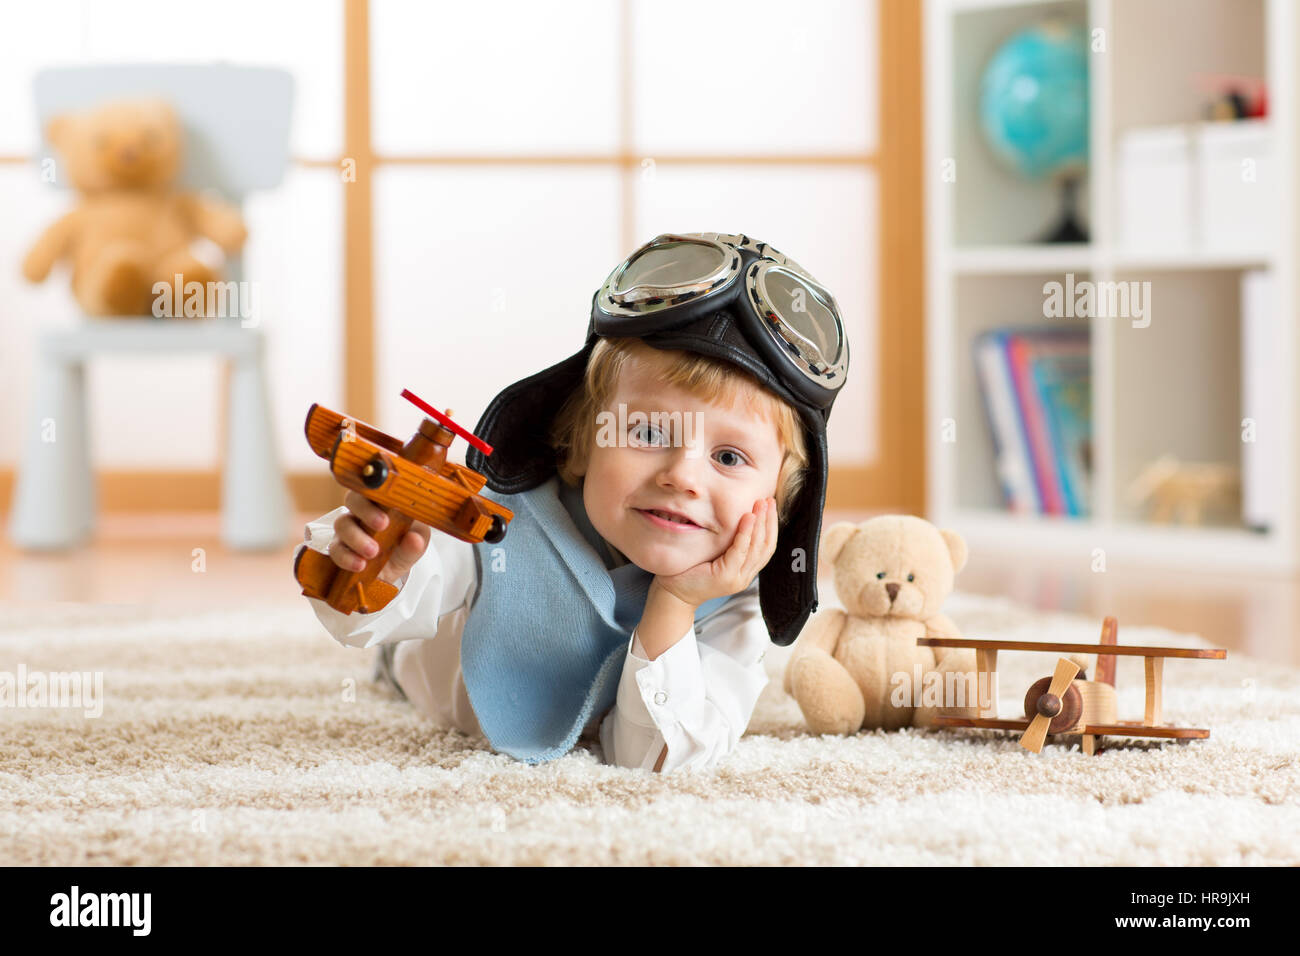 portrait of little boy playing with wooden airplane Stock Photo